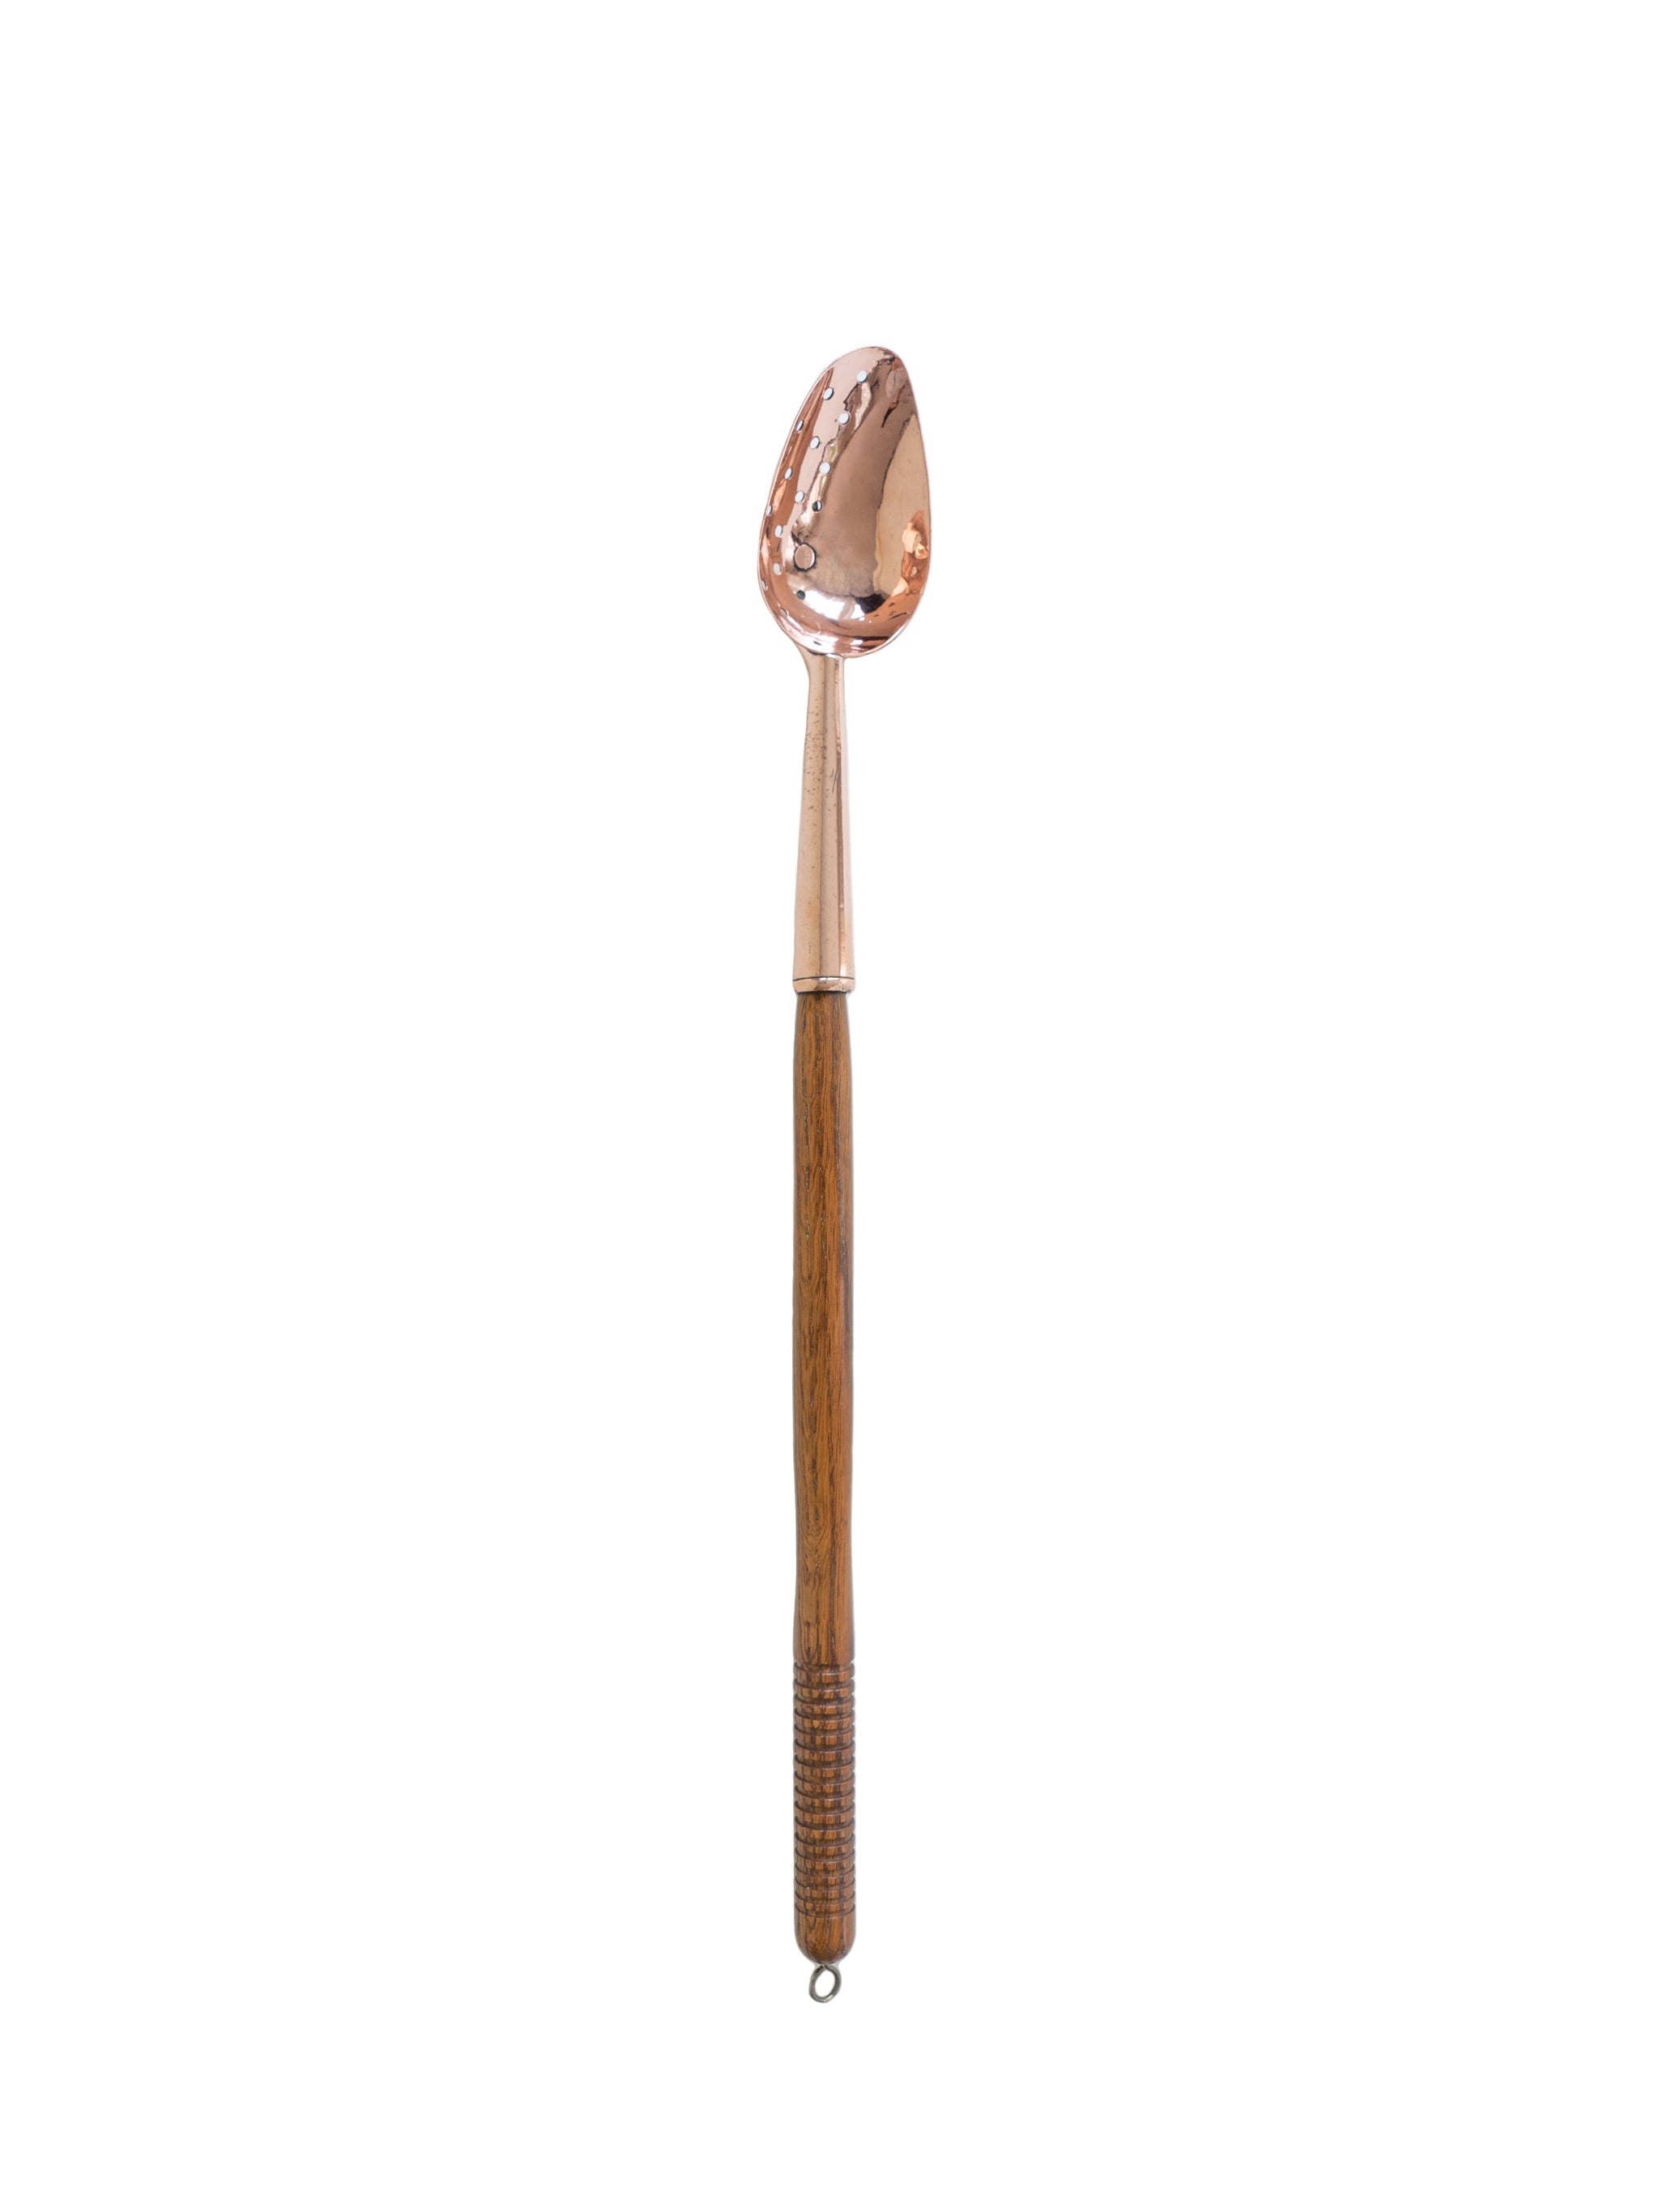 Shop the Vintage 1850s English Copper Straining Spoon at Weston Table